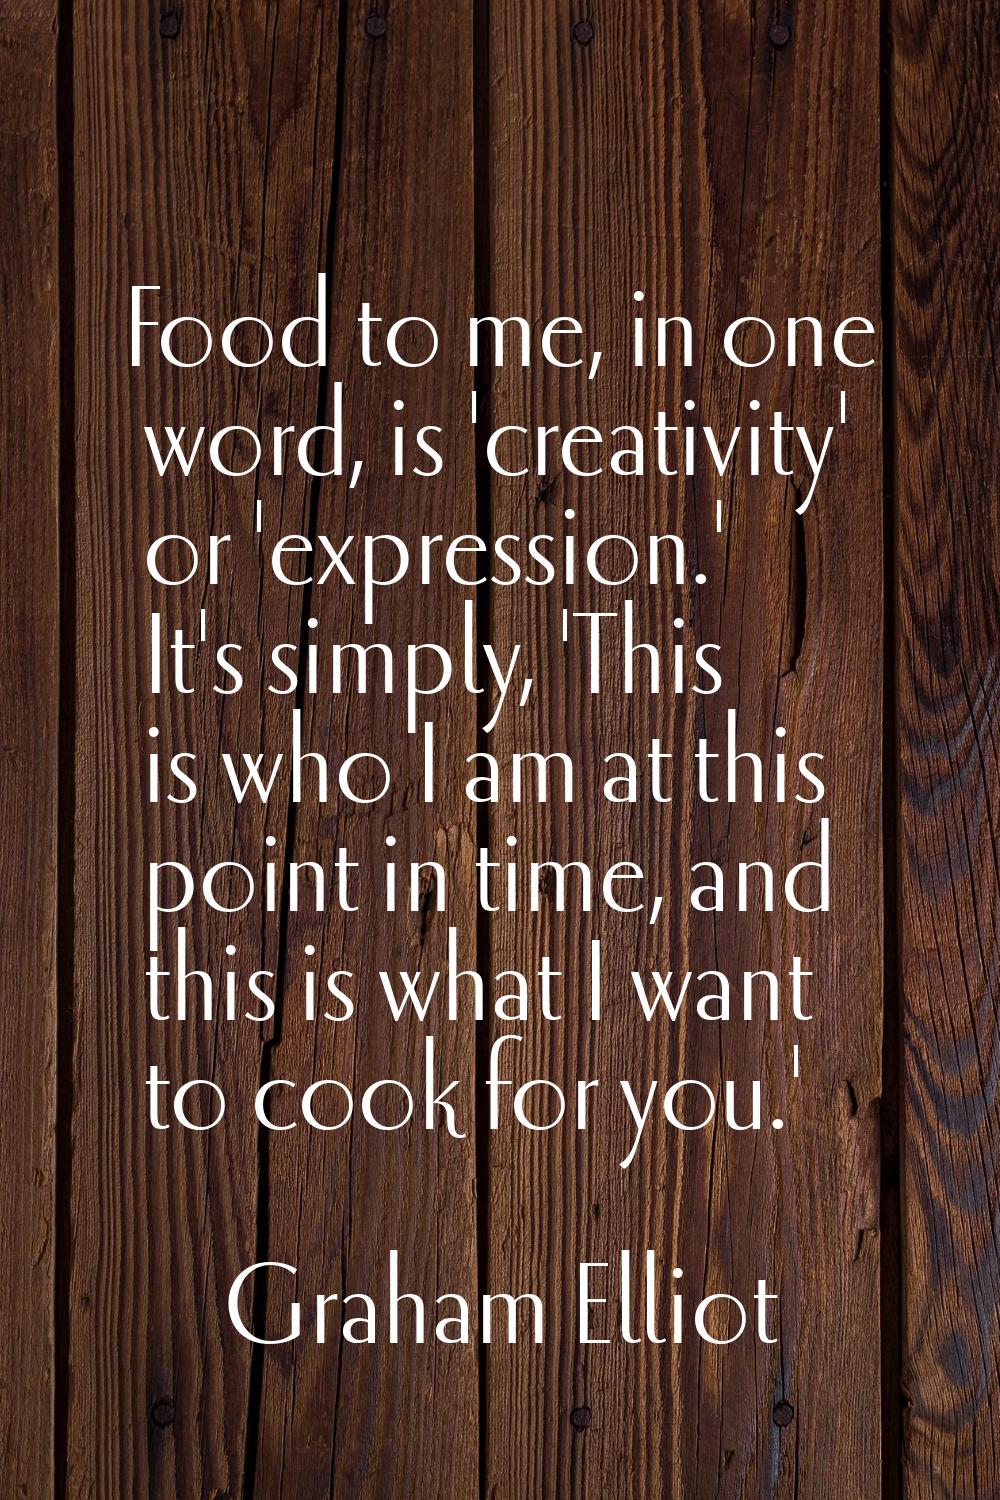 Food to me, in one word, is 'creativity' or 'expression.' It's simply, 'This is who I am at this po